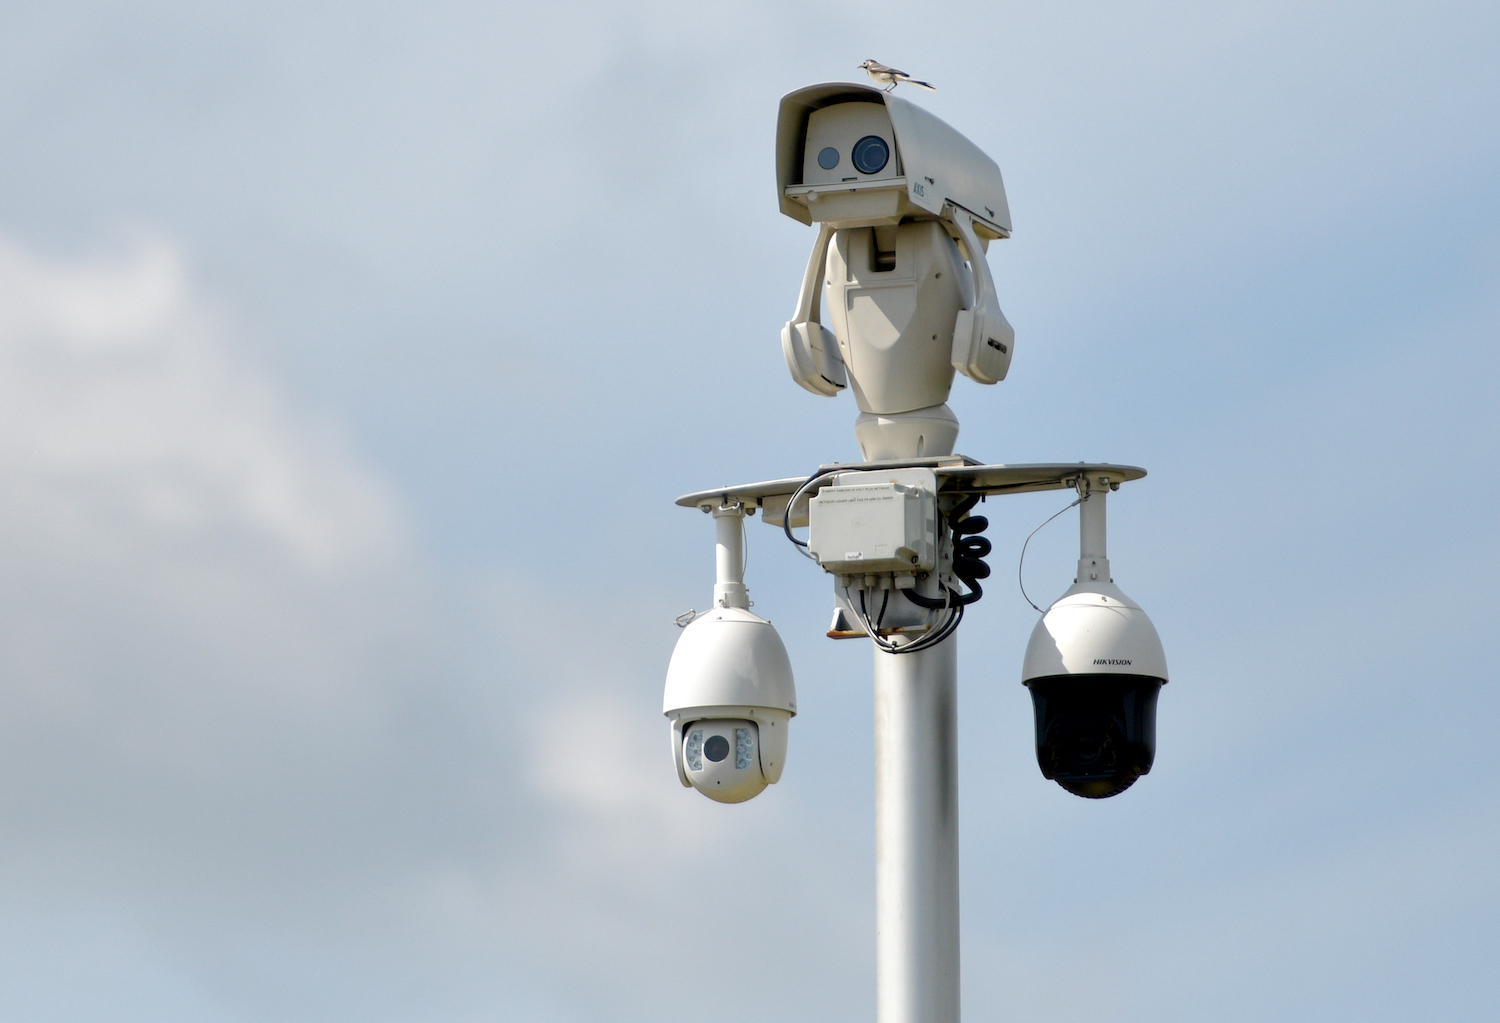 The scanners of an automatic license reader system mounted high on a pole over a highway, the sky visible in the background.